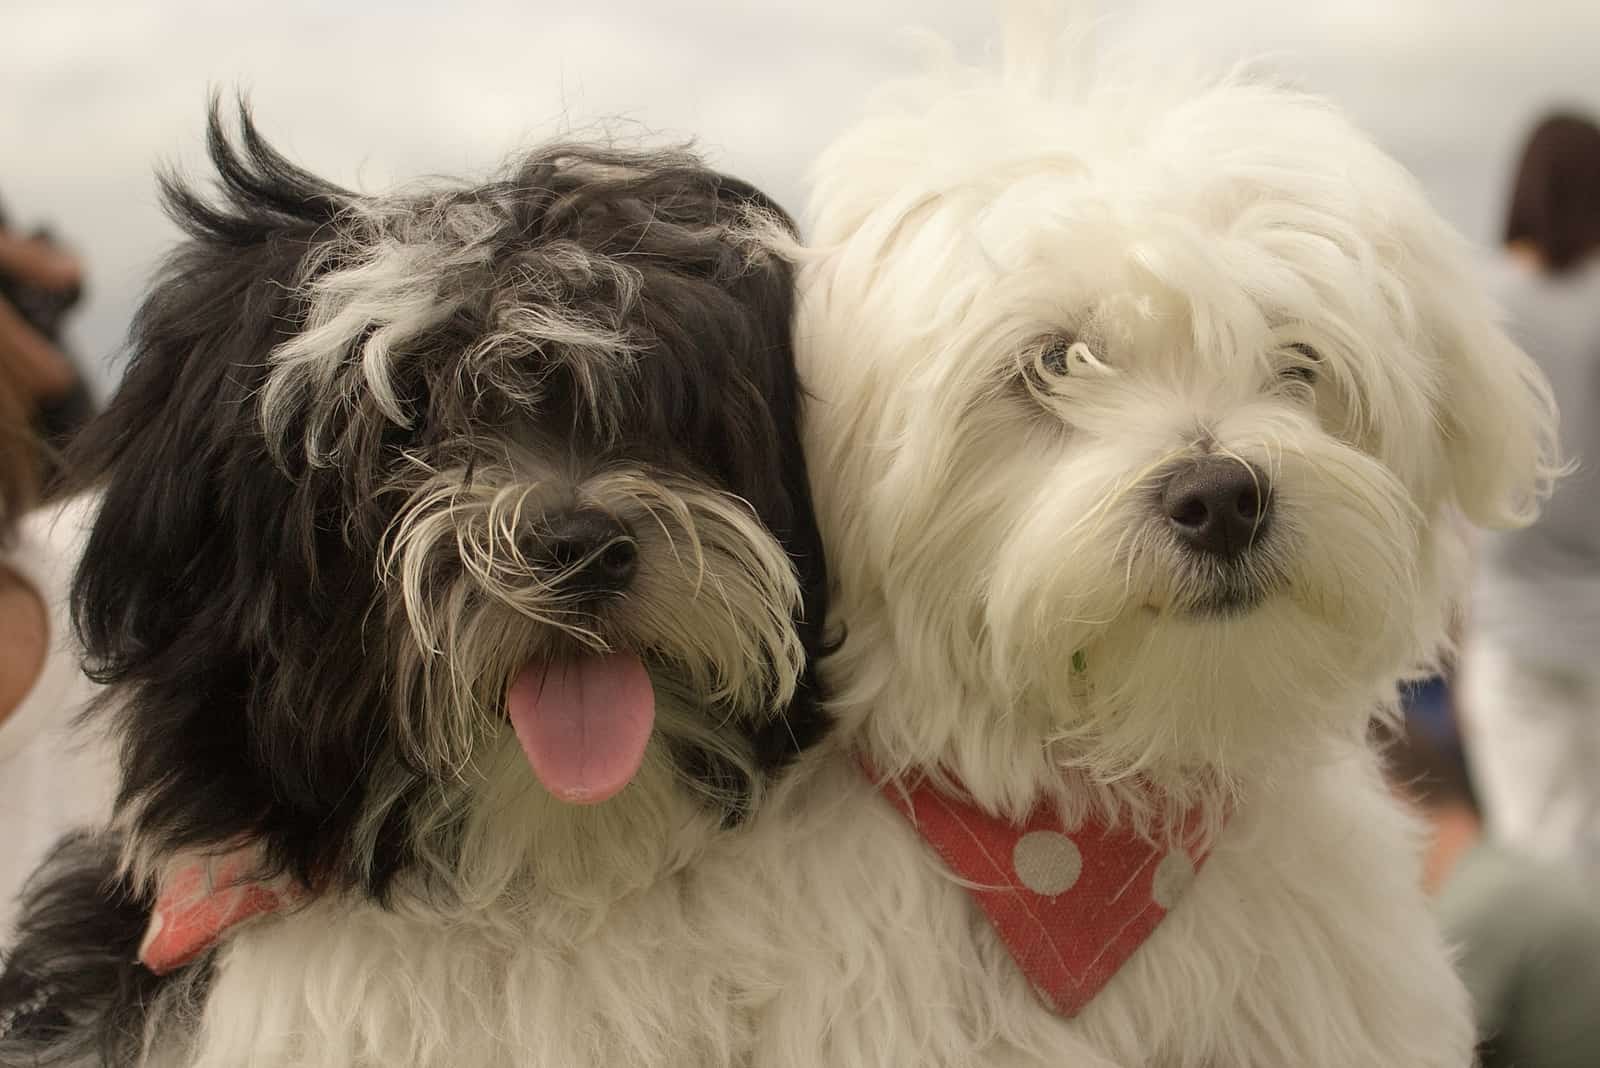 portrait of two shaggy dogs